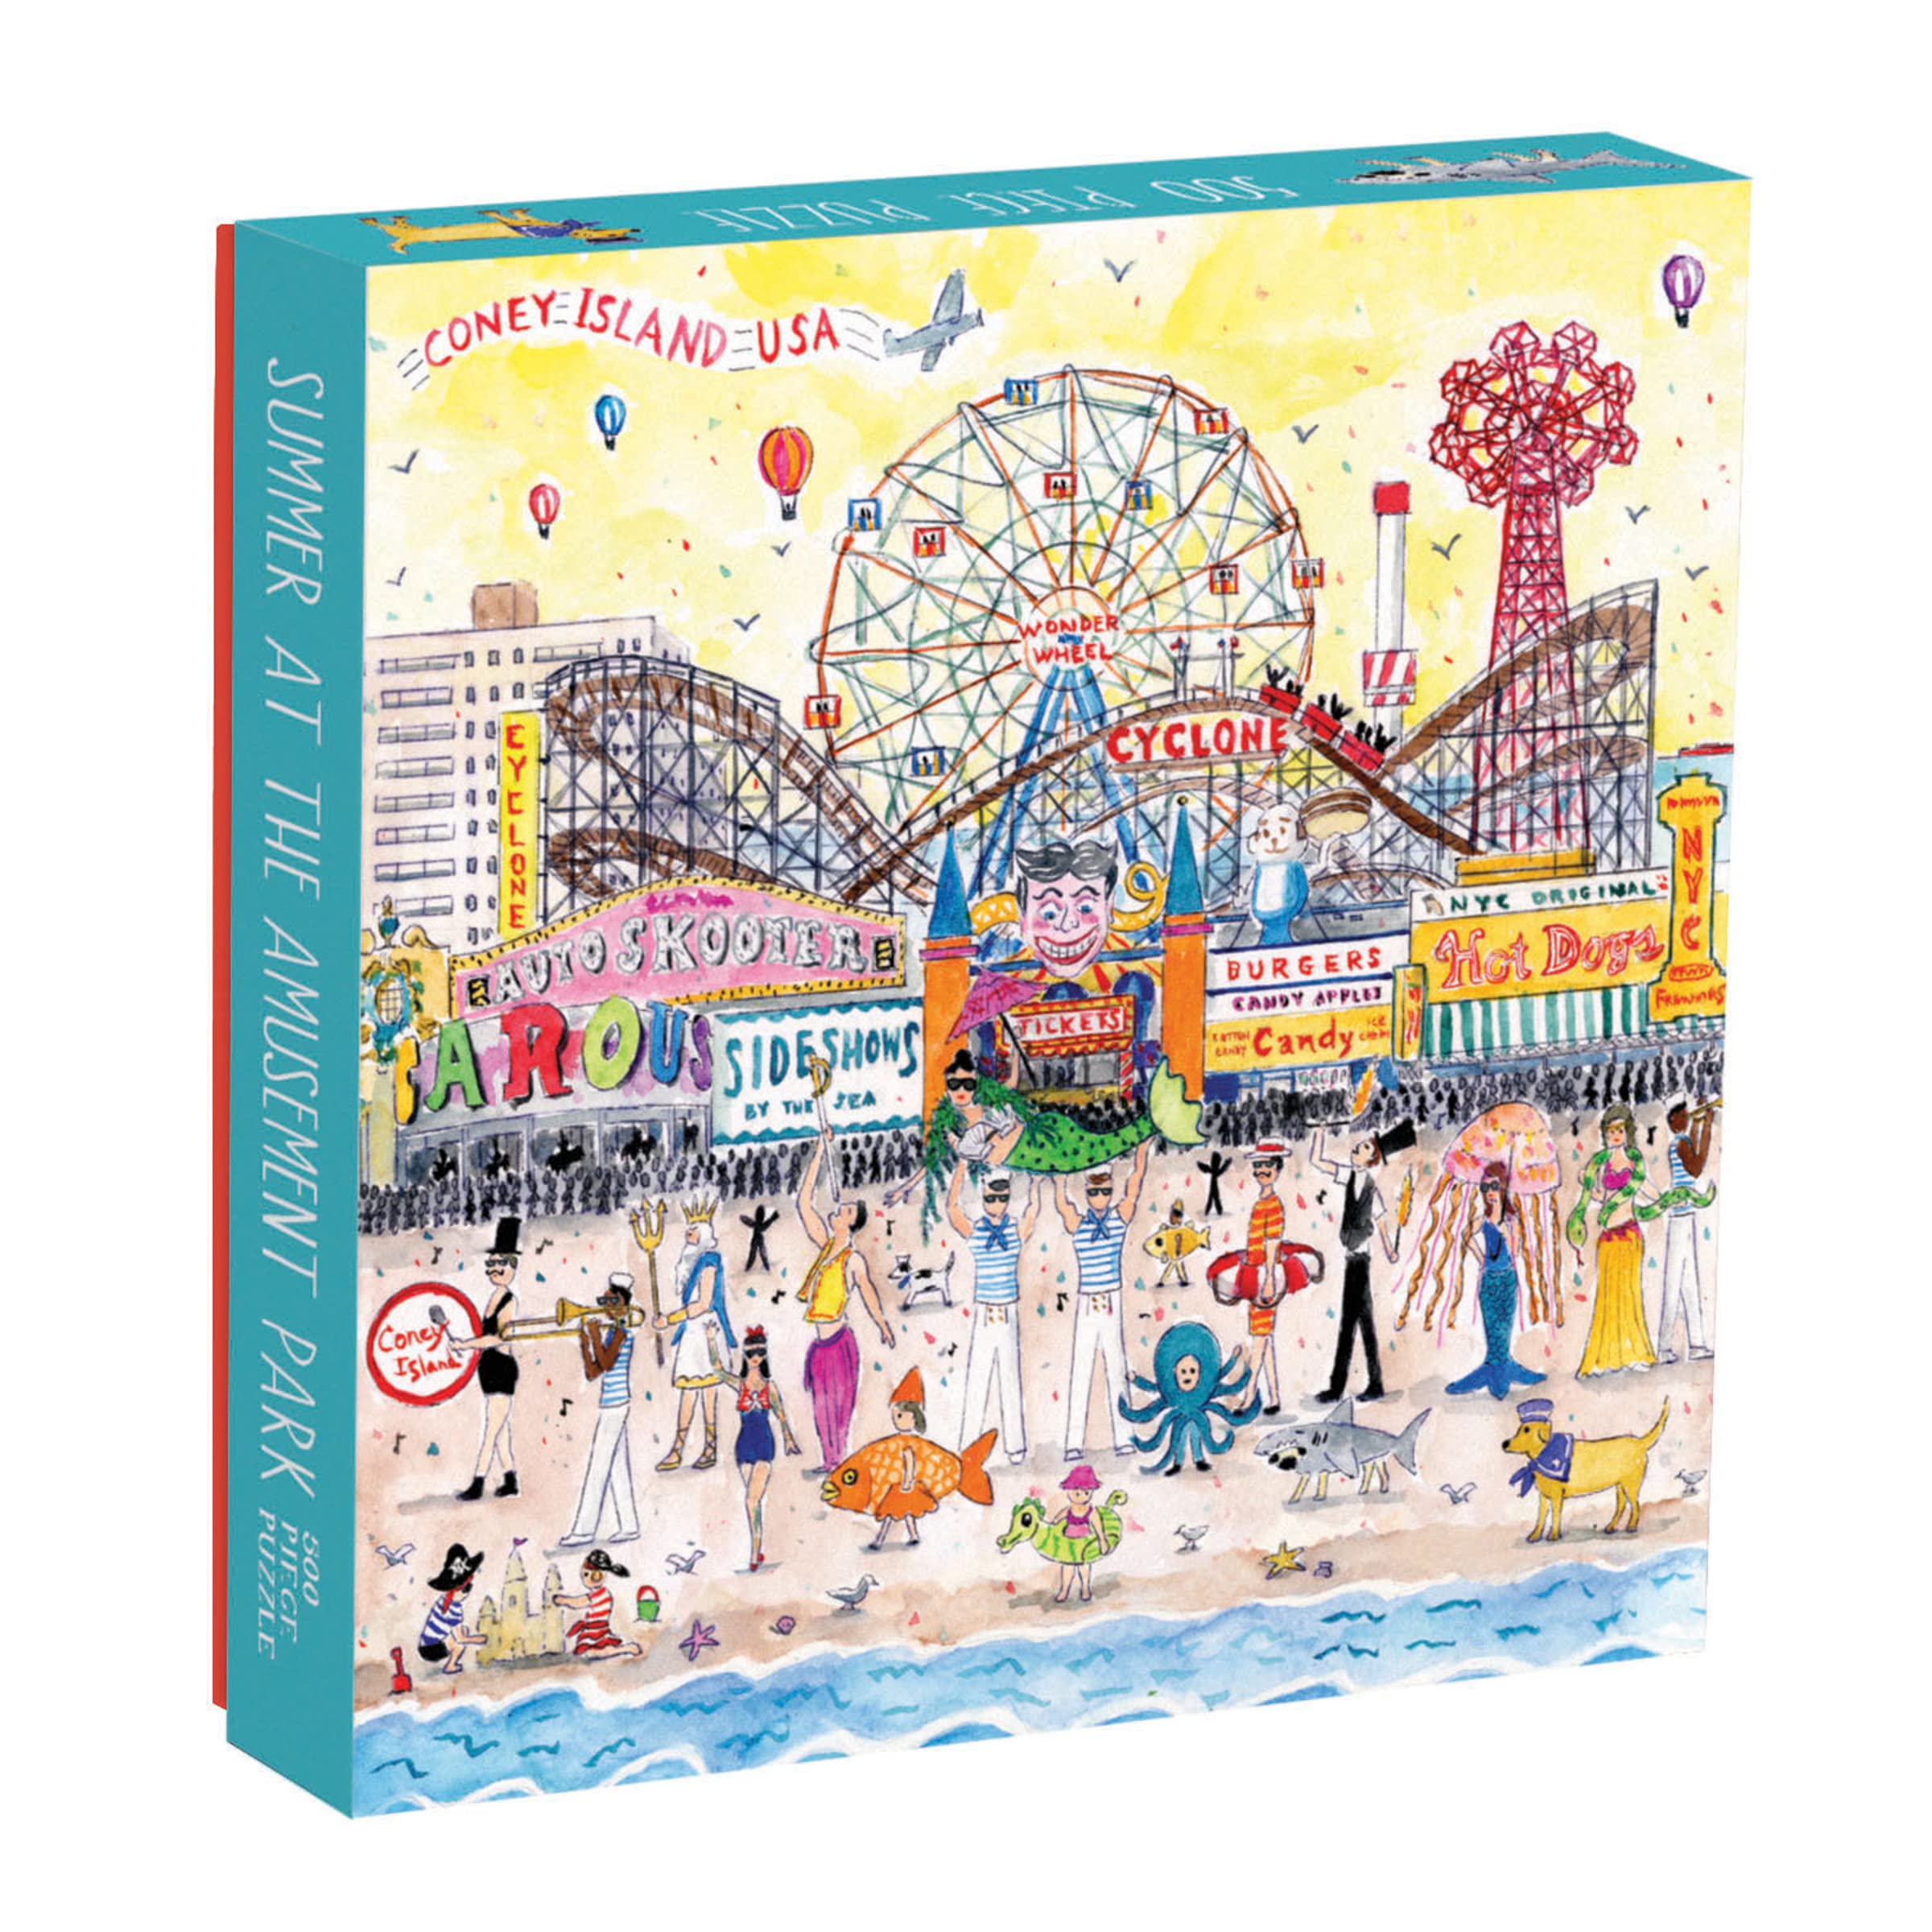 Galison Michael Storrings 500 Piece Jigsaw Puzzle for Families, Summer at The Amusement Park Scene, Great Family Puzzle to Enjoy Together